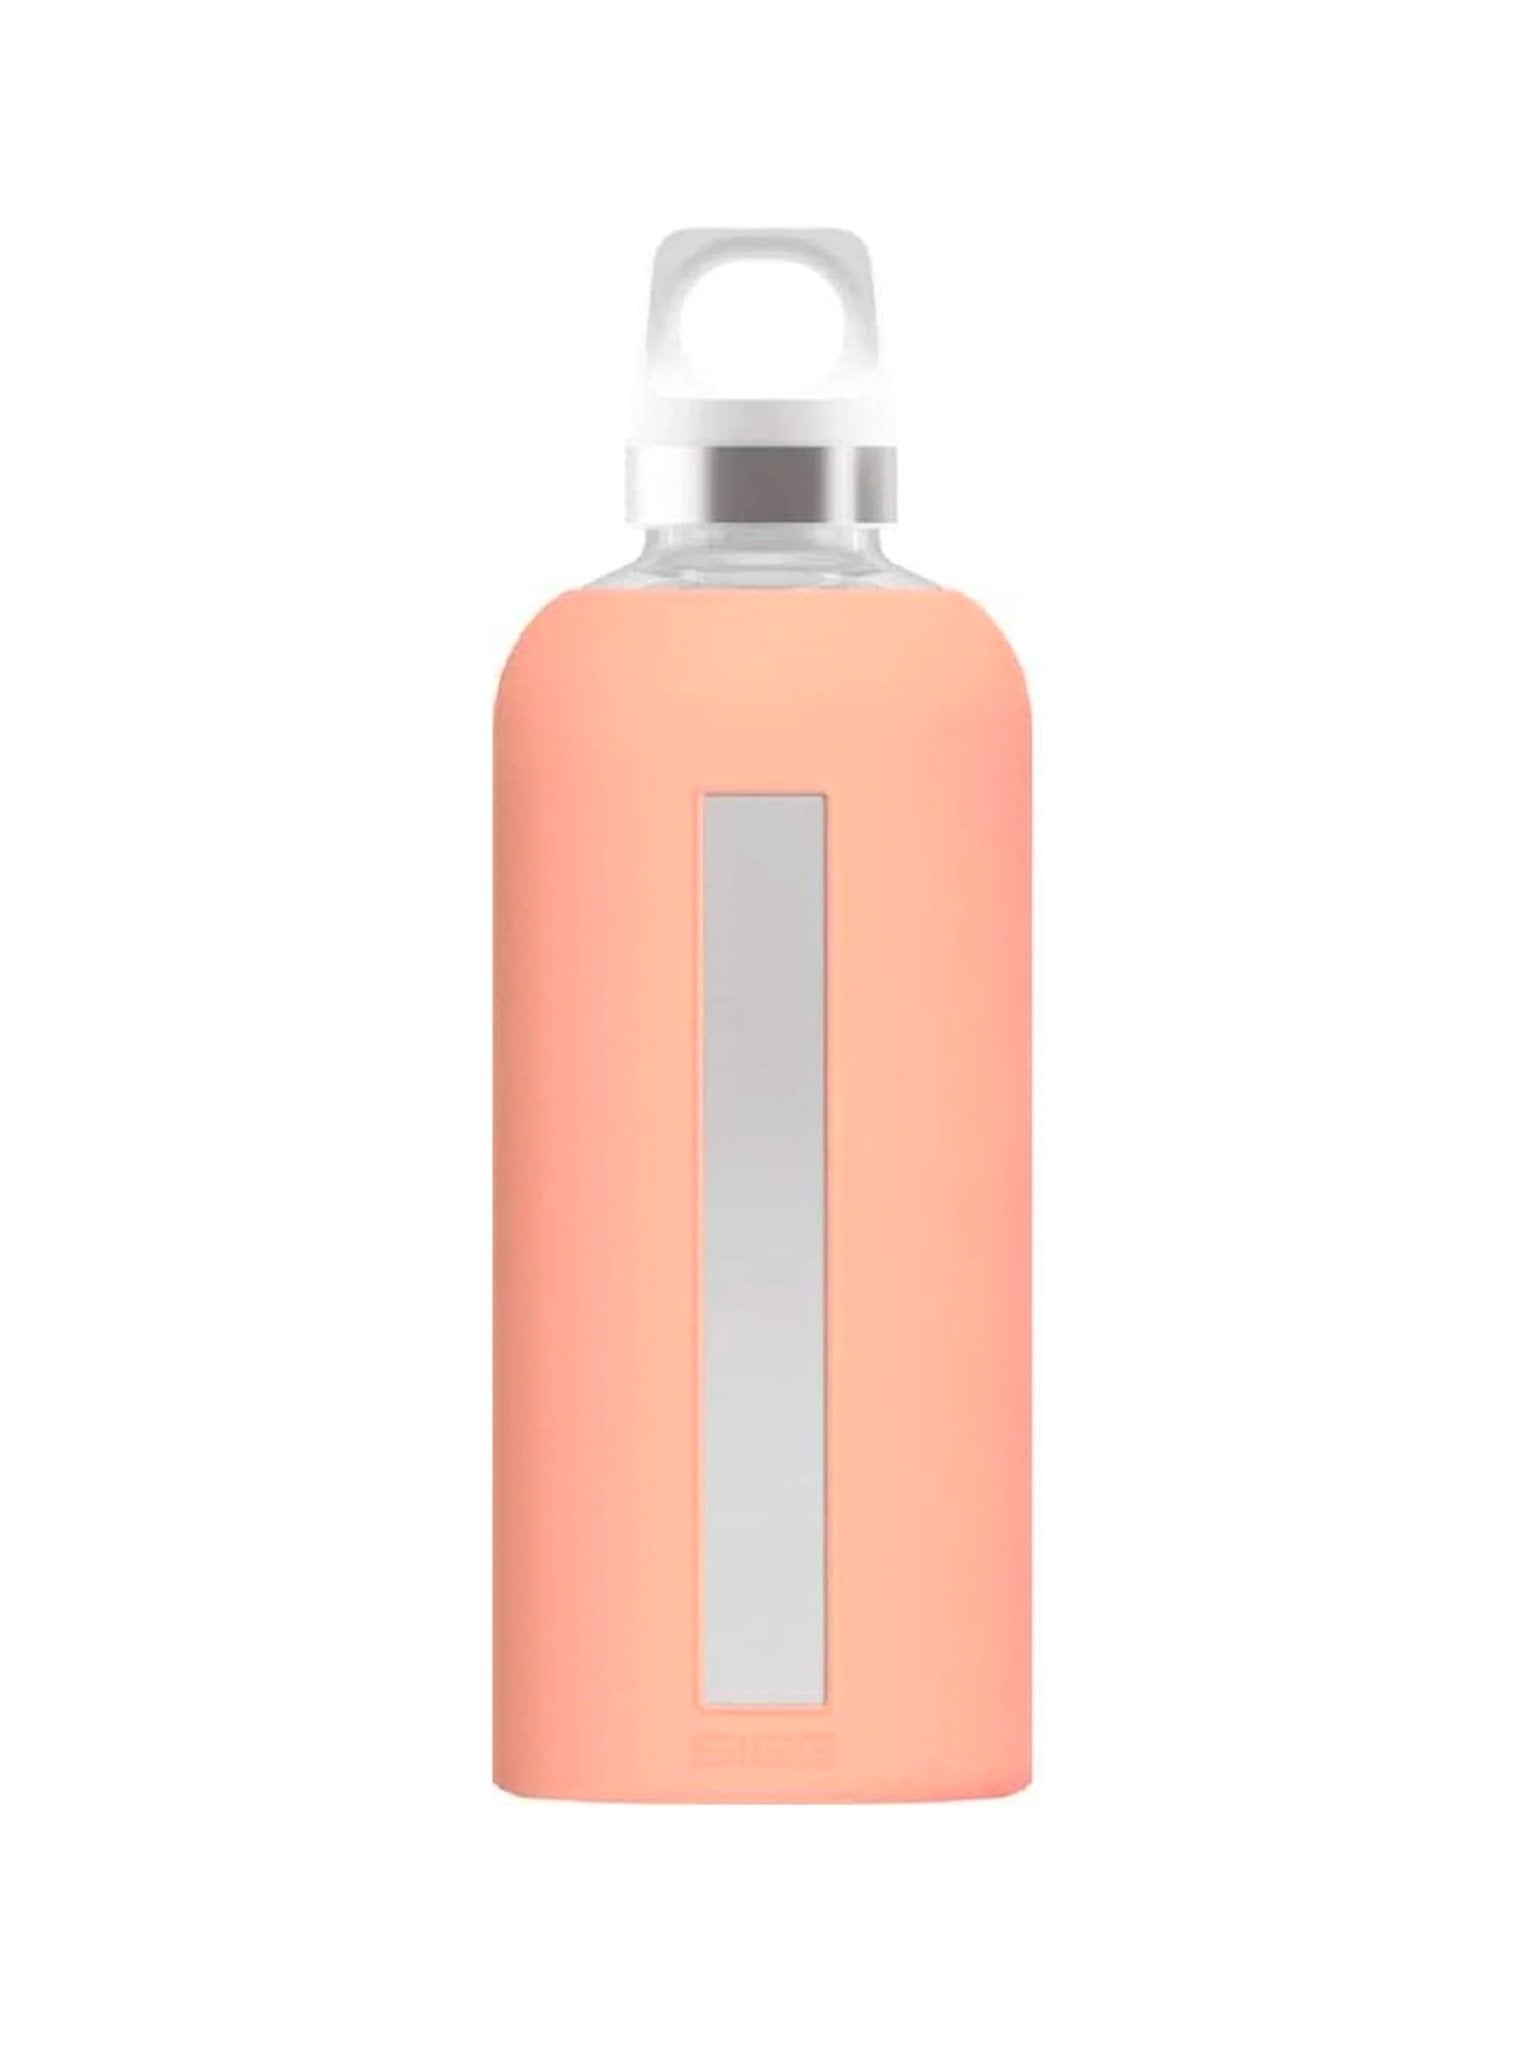 4elementsclothingSiggSIGG - Star Water Bottle, Leak-Proof Glass Bottle, Heat-Resistant with Silicone CaseWater Bottles8774.10